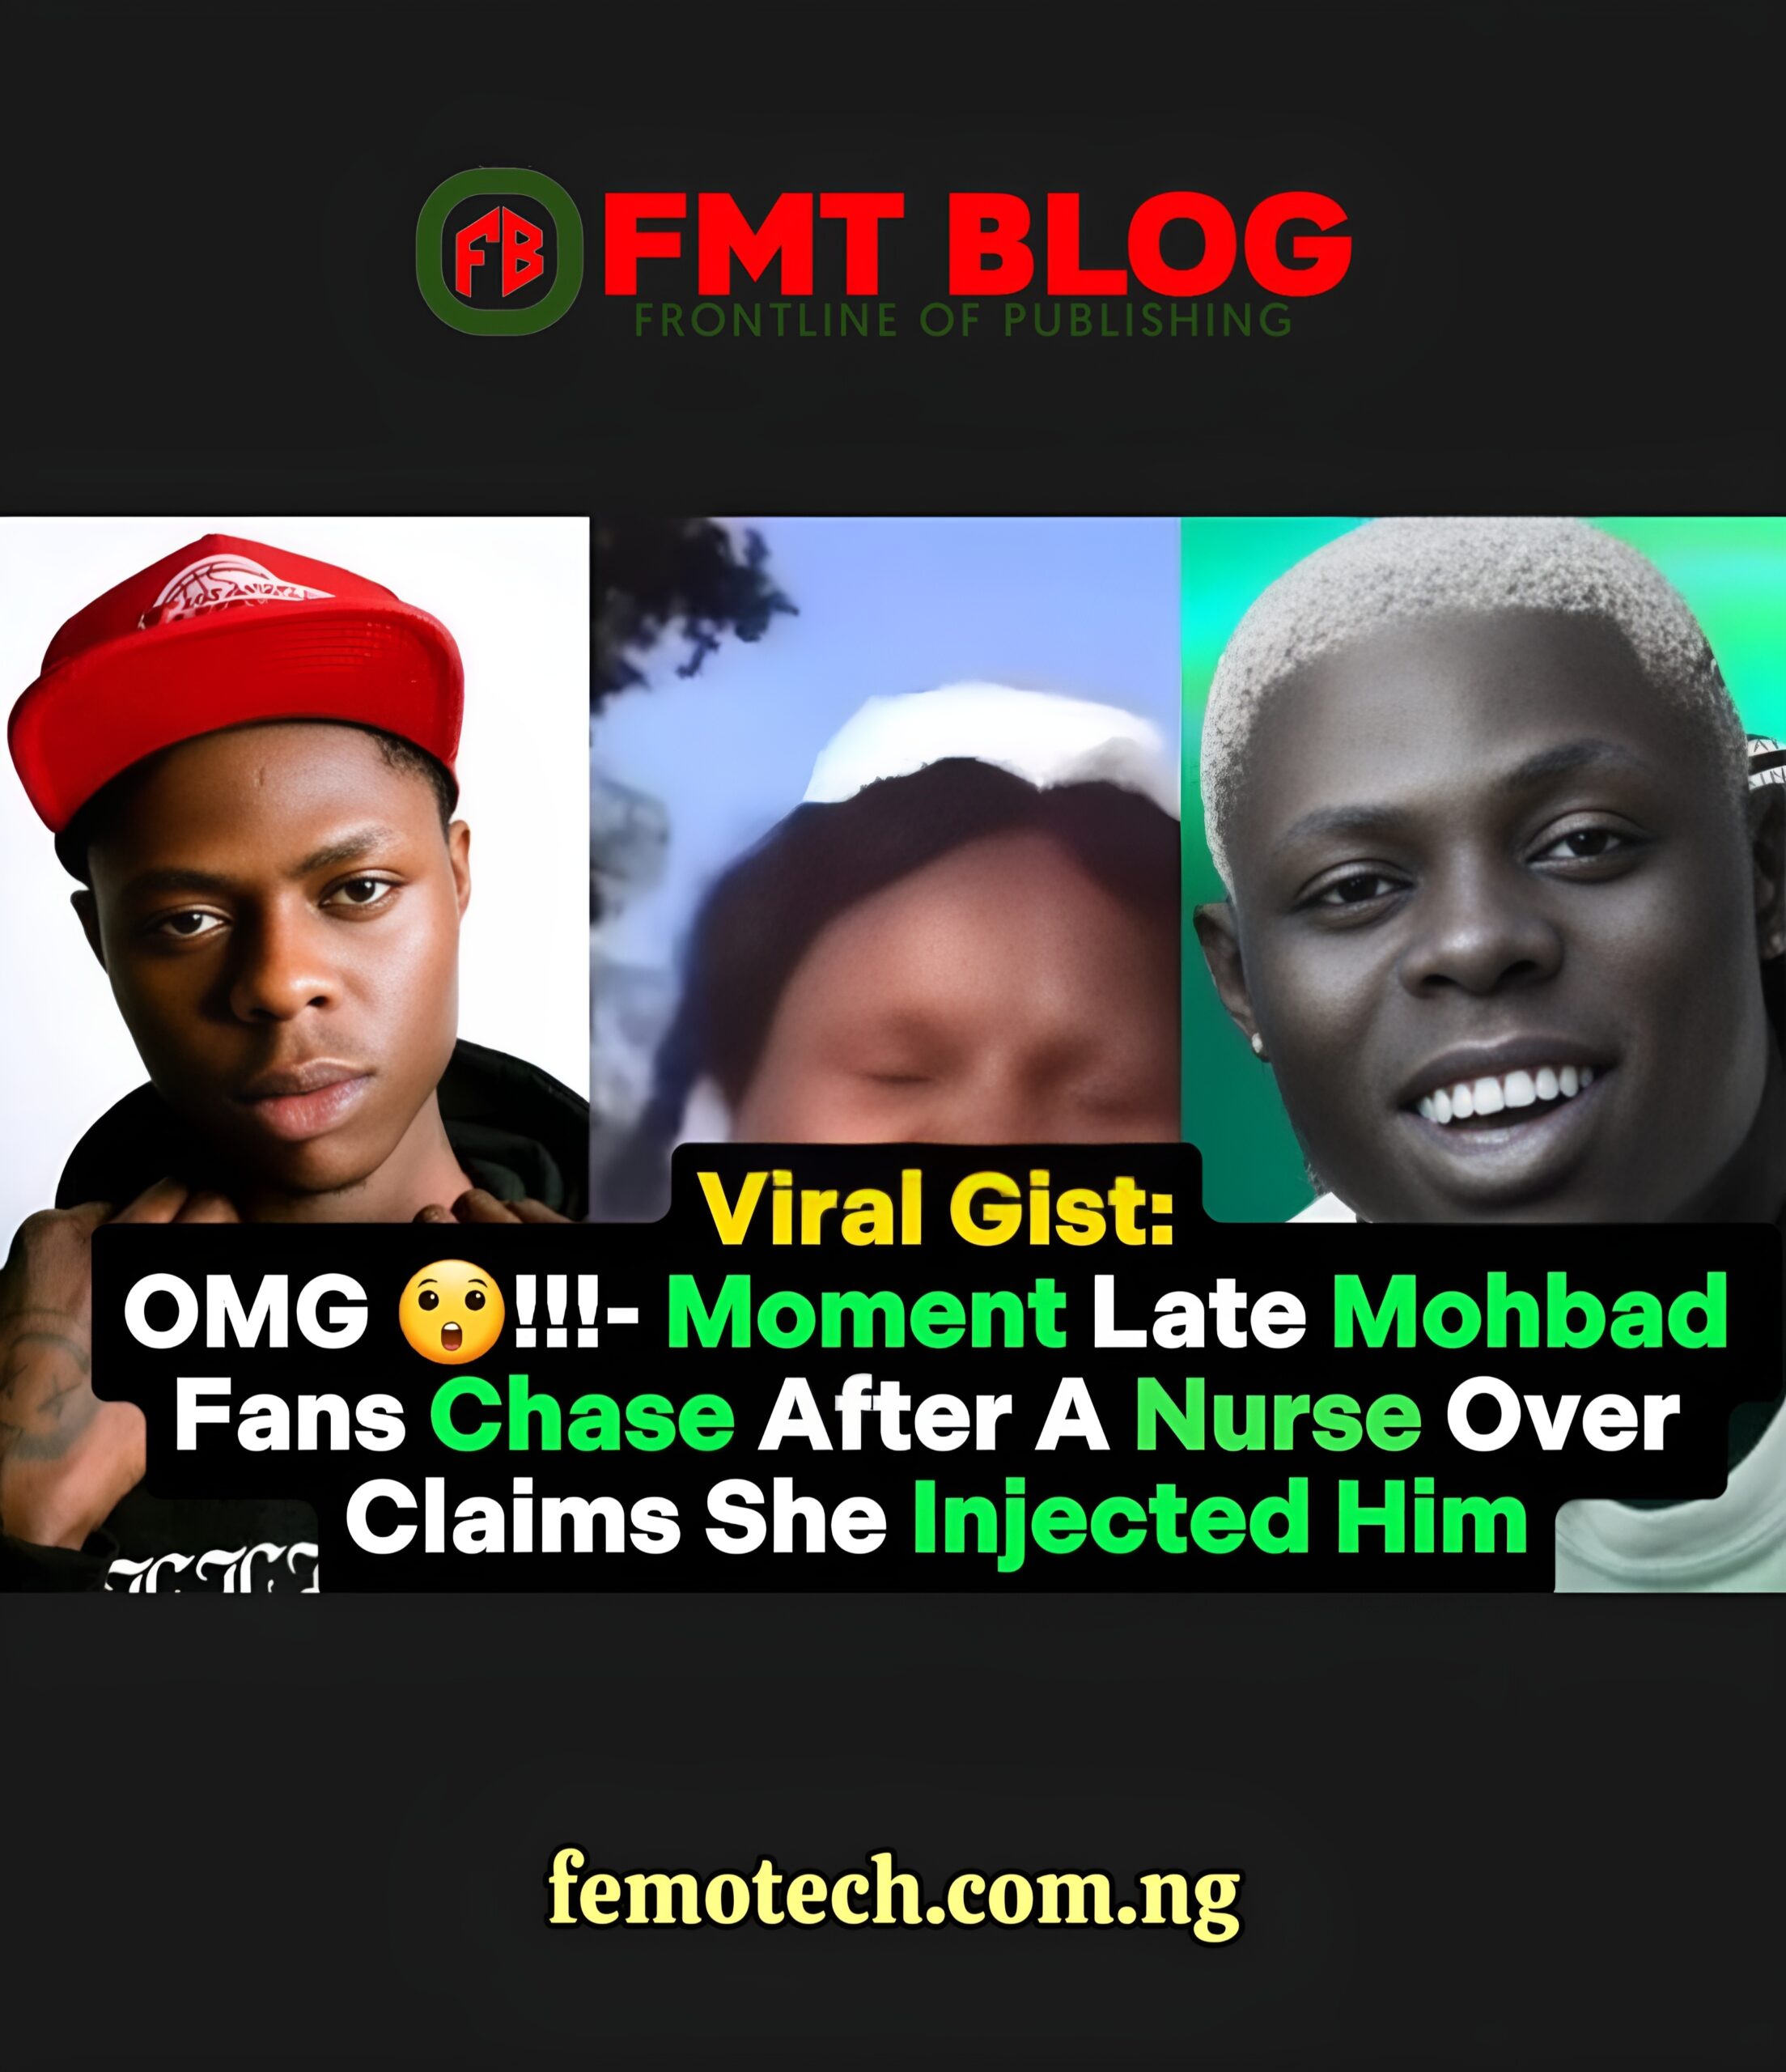 OMG 😲!!!-Moment Late Mohbad Fans Chase After A Nurse Over Claims She Injected Him (Video)